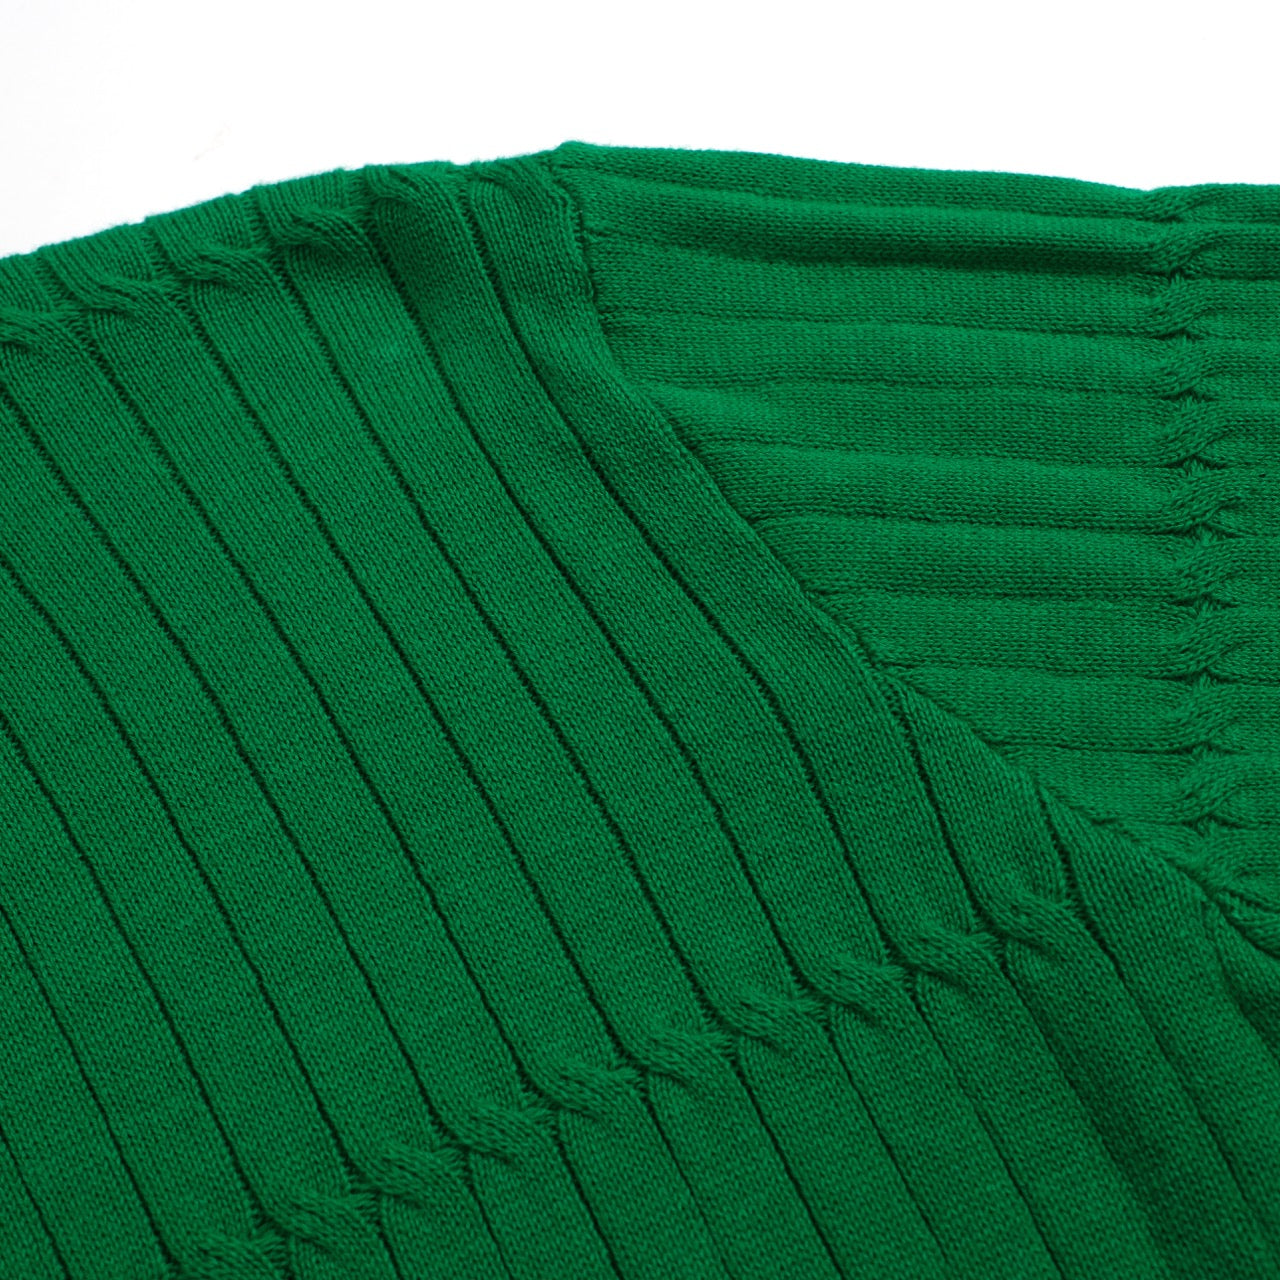 Women Green Long Sleeve Knitted Top With Black Ribbed Collar